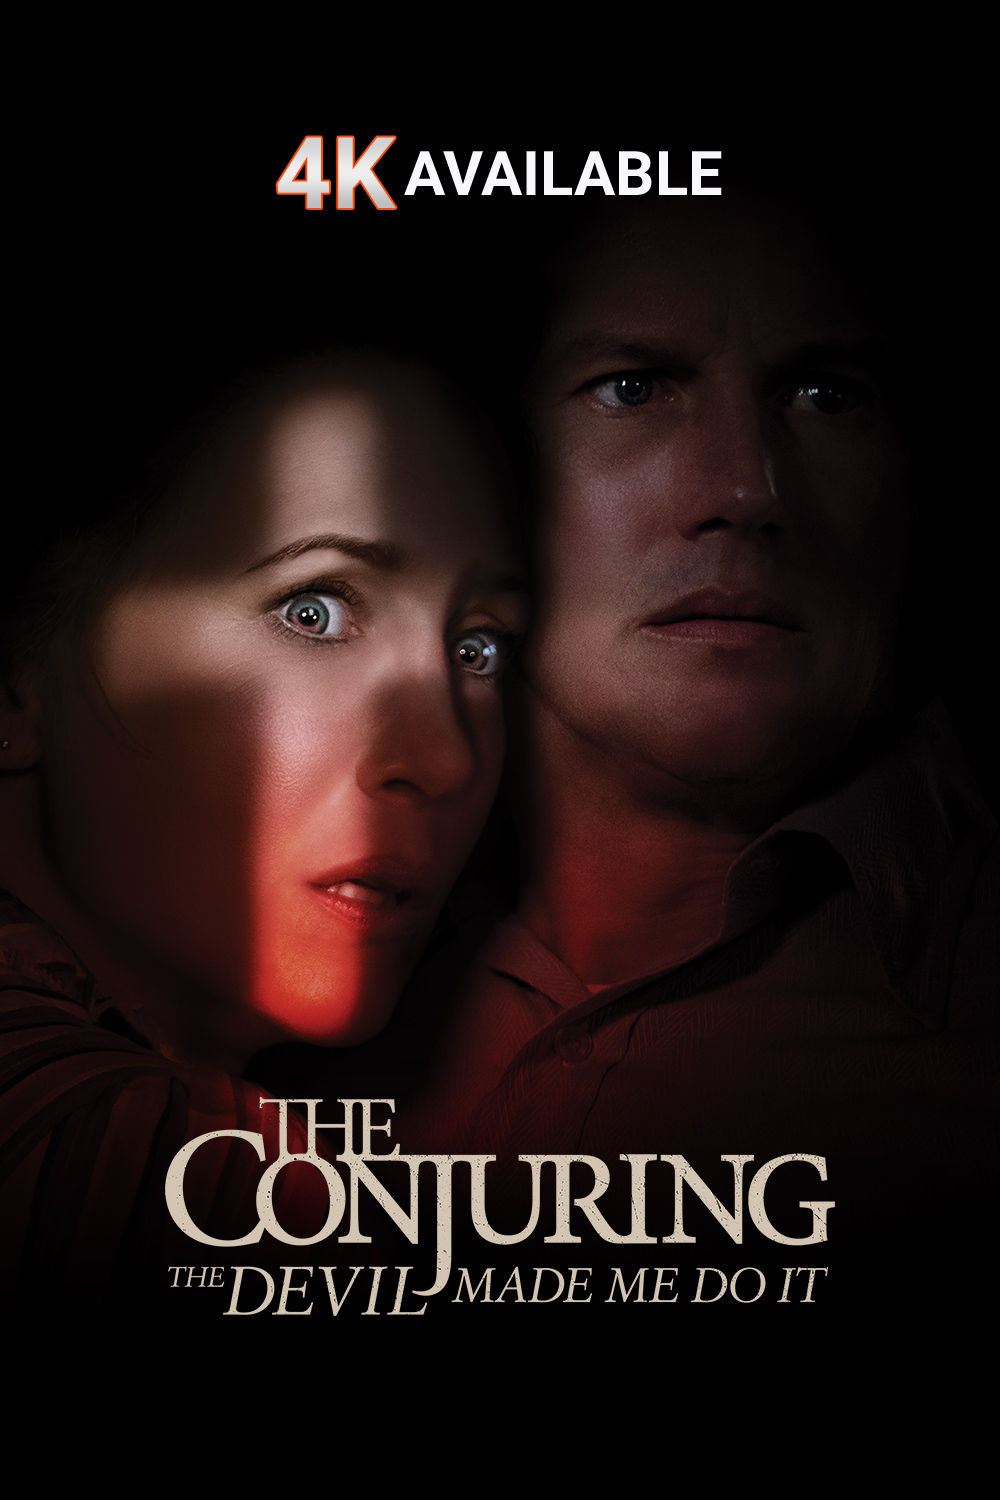 Watch The Conjuring: The Devil Made Me Do It Online